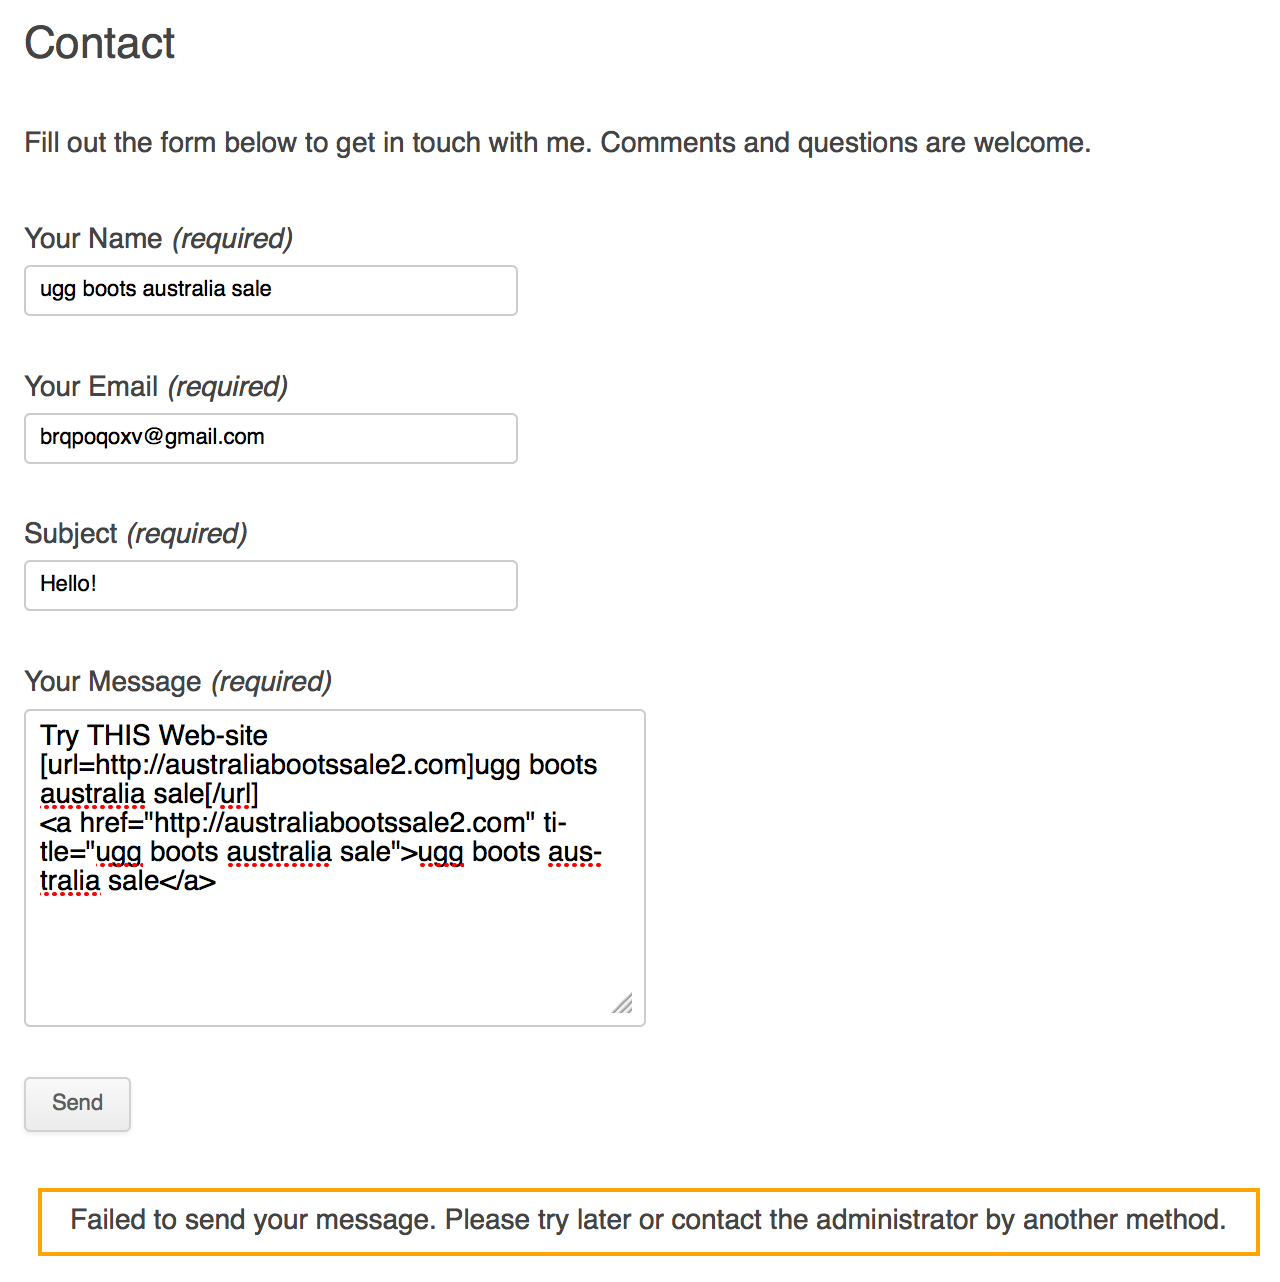 Screenshot of contact form filled out with spam.